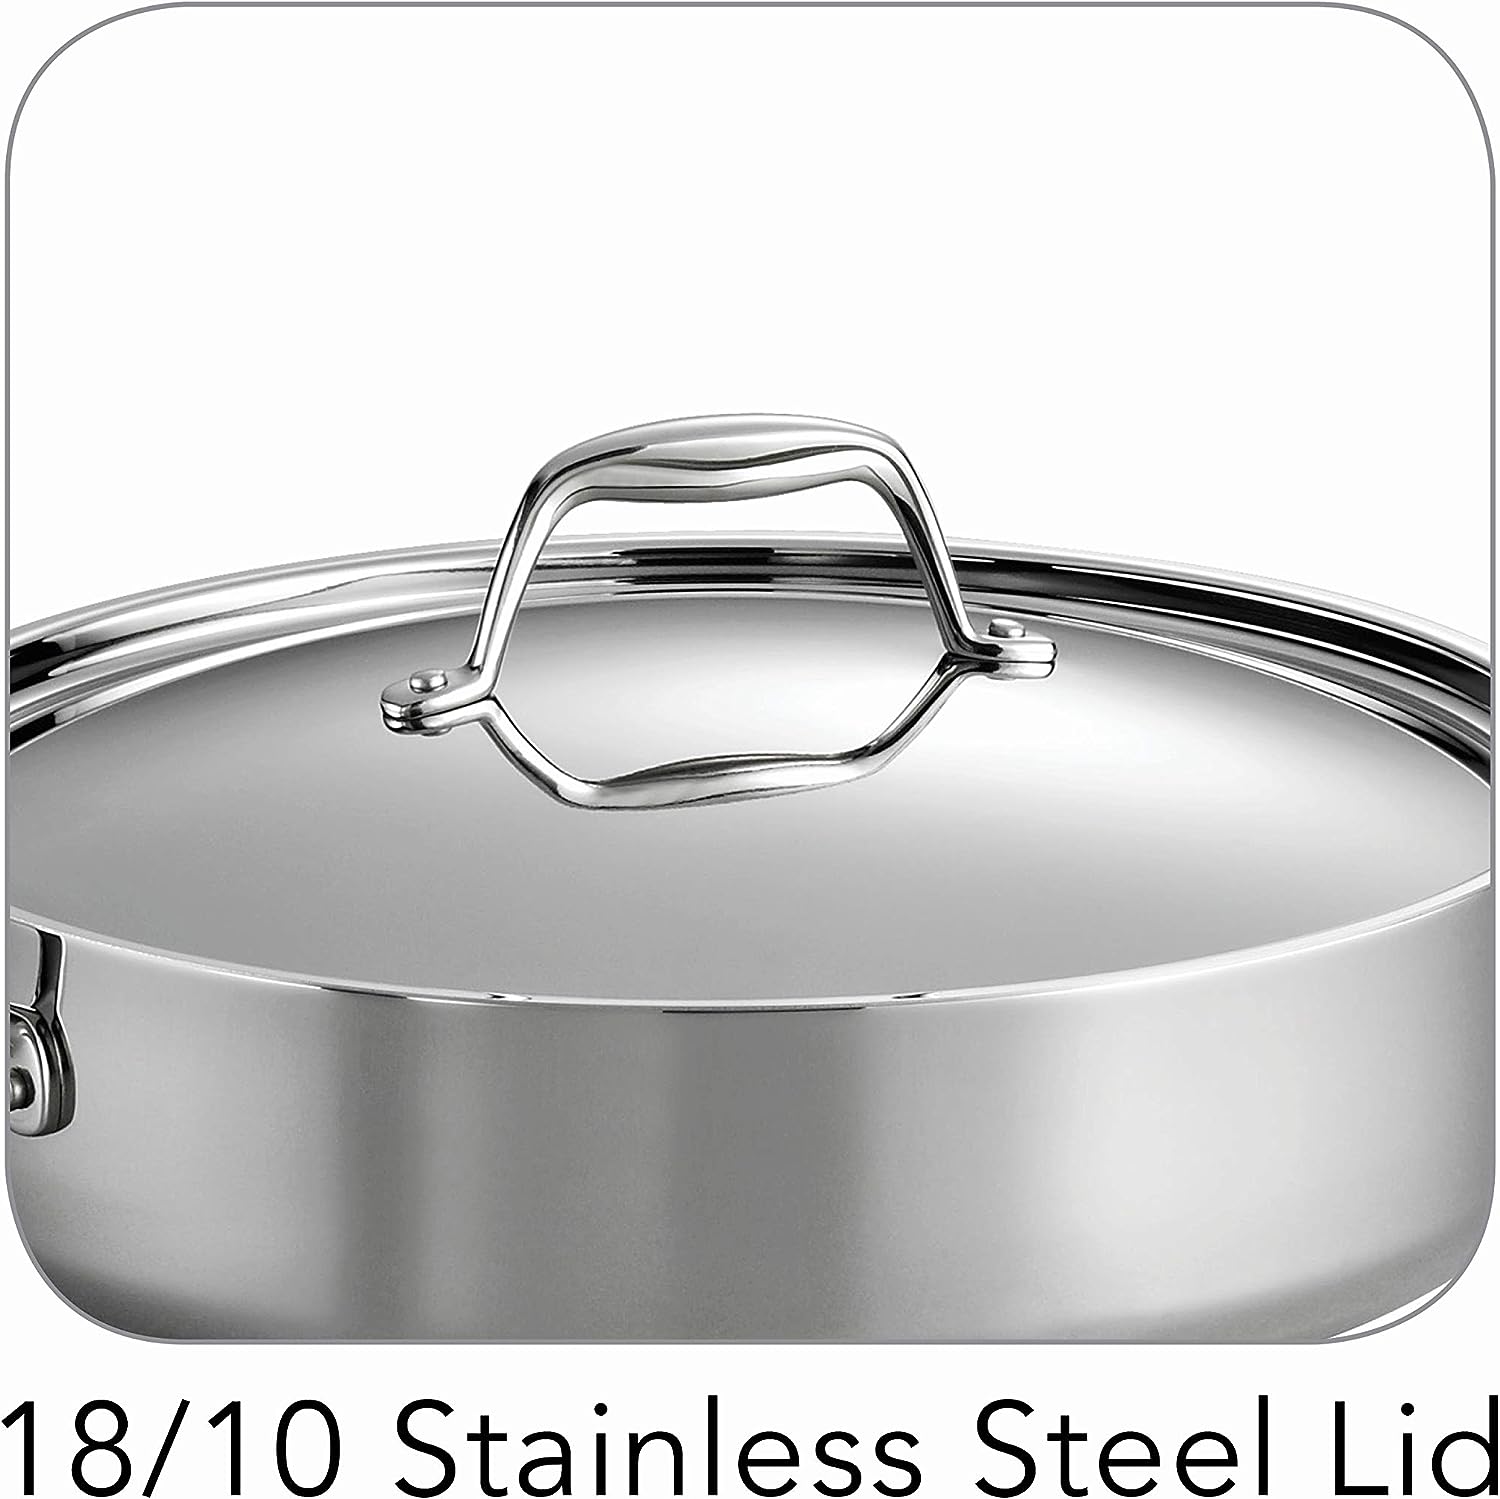 Tramontina Gourmet Tri-Ply Clad 2 qt. Stainless Steel Sauce Pan